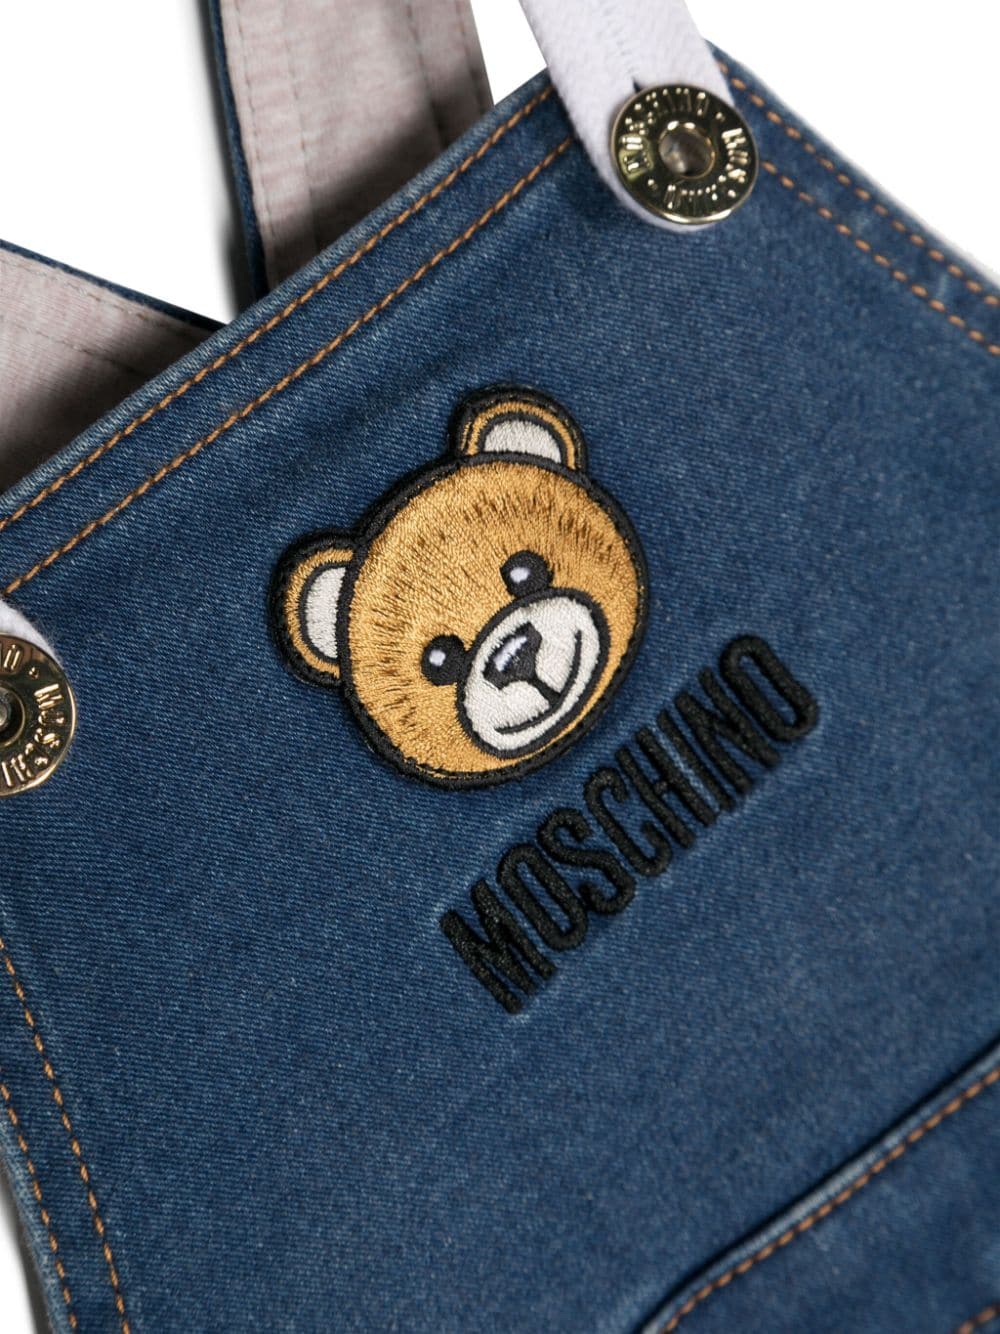 Moschino Kids salopette in jeans